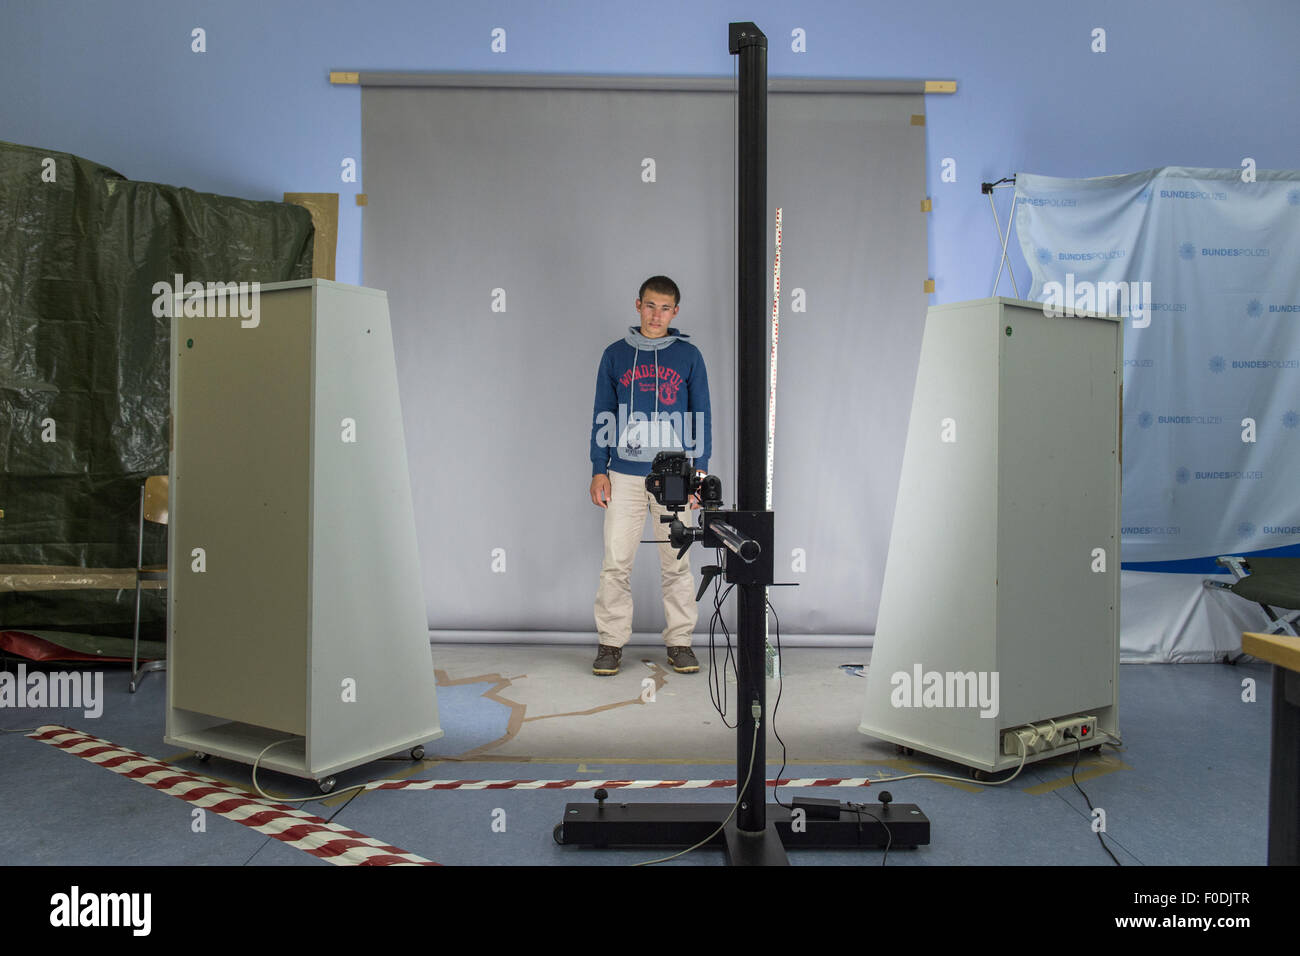 Illuminated by spotlights is 16 year old refugee Kahlil from Afghanistan in an improvised police station at Frankfurt main station, Germany, 5 August 2015. Hasan is being photographed as per the digital identification procedures in place. Alluding to the wall color to officials call the room "Blue Lagoon". The illiterate asylum seeker was abandoned by smugglers after months spent fleeing without family members. Photo: BORRIS ROESSLER/dpa Stock Photo